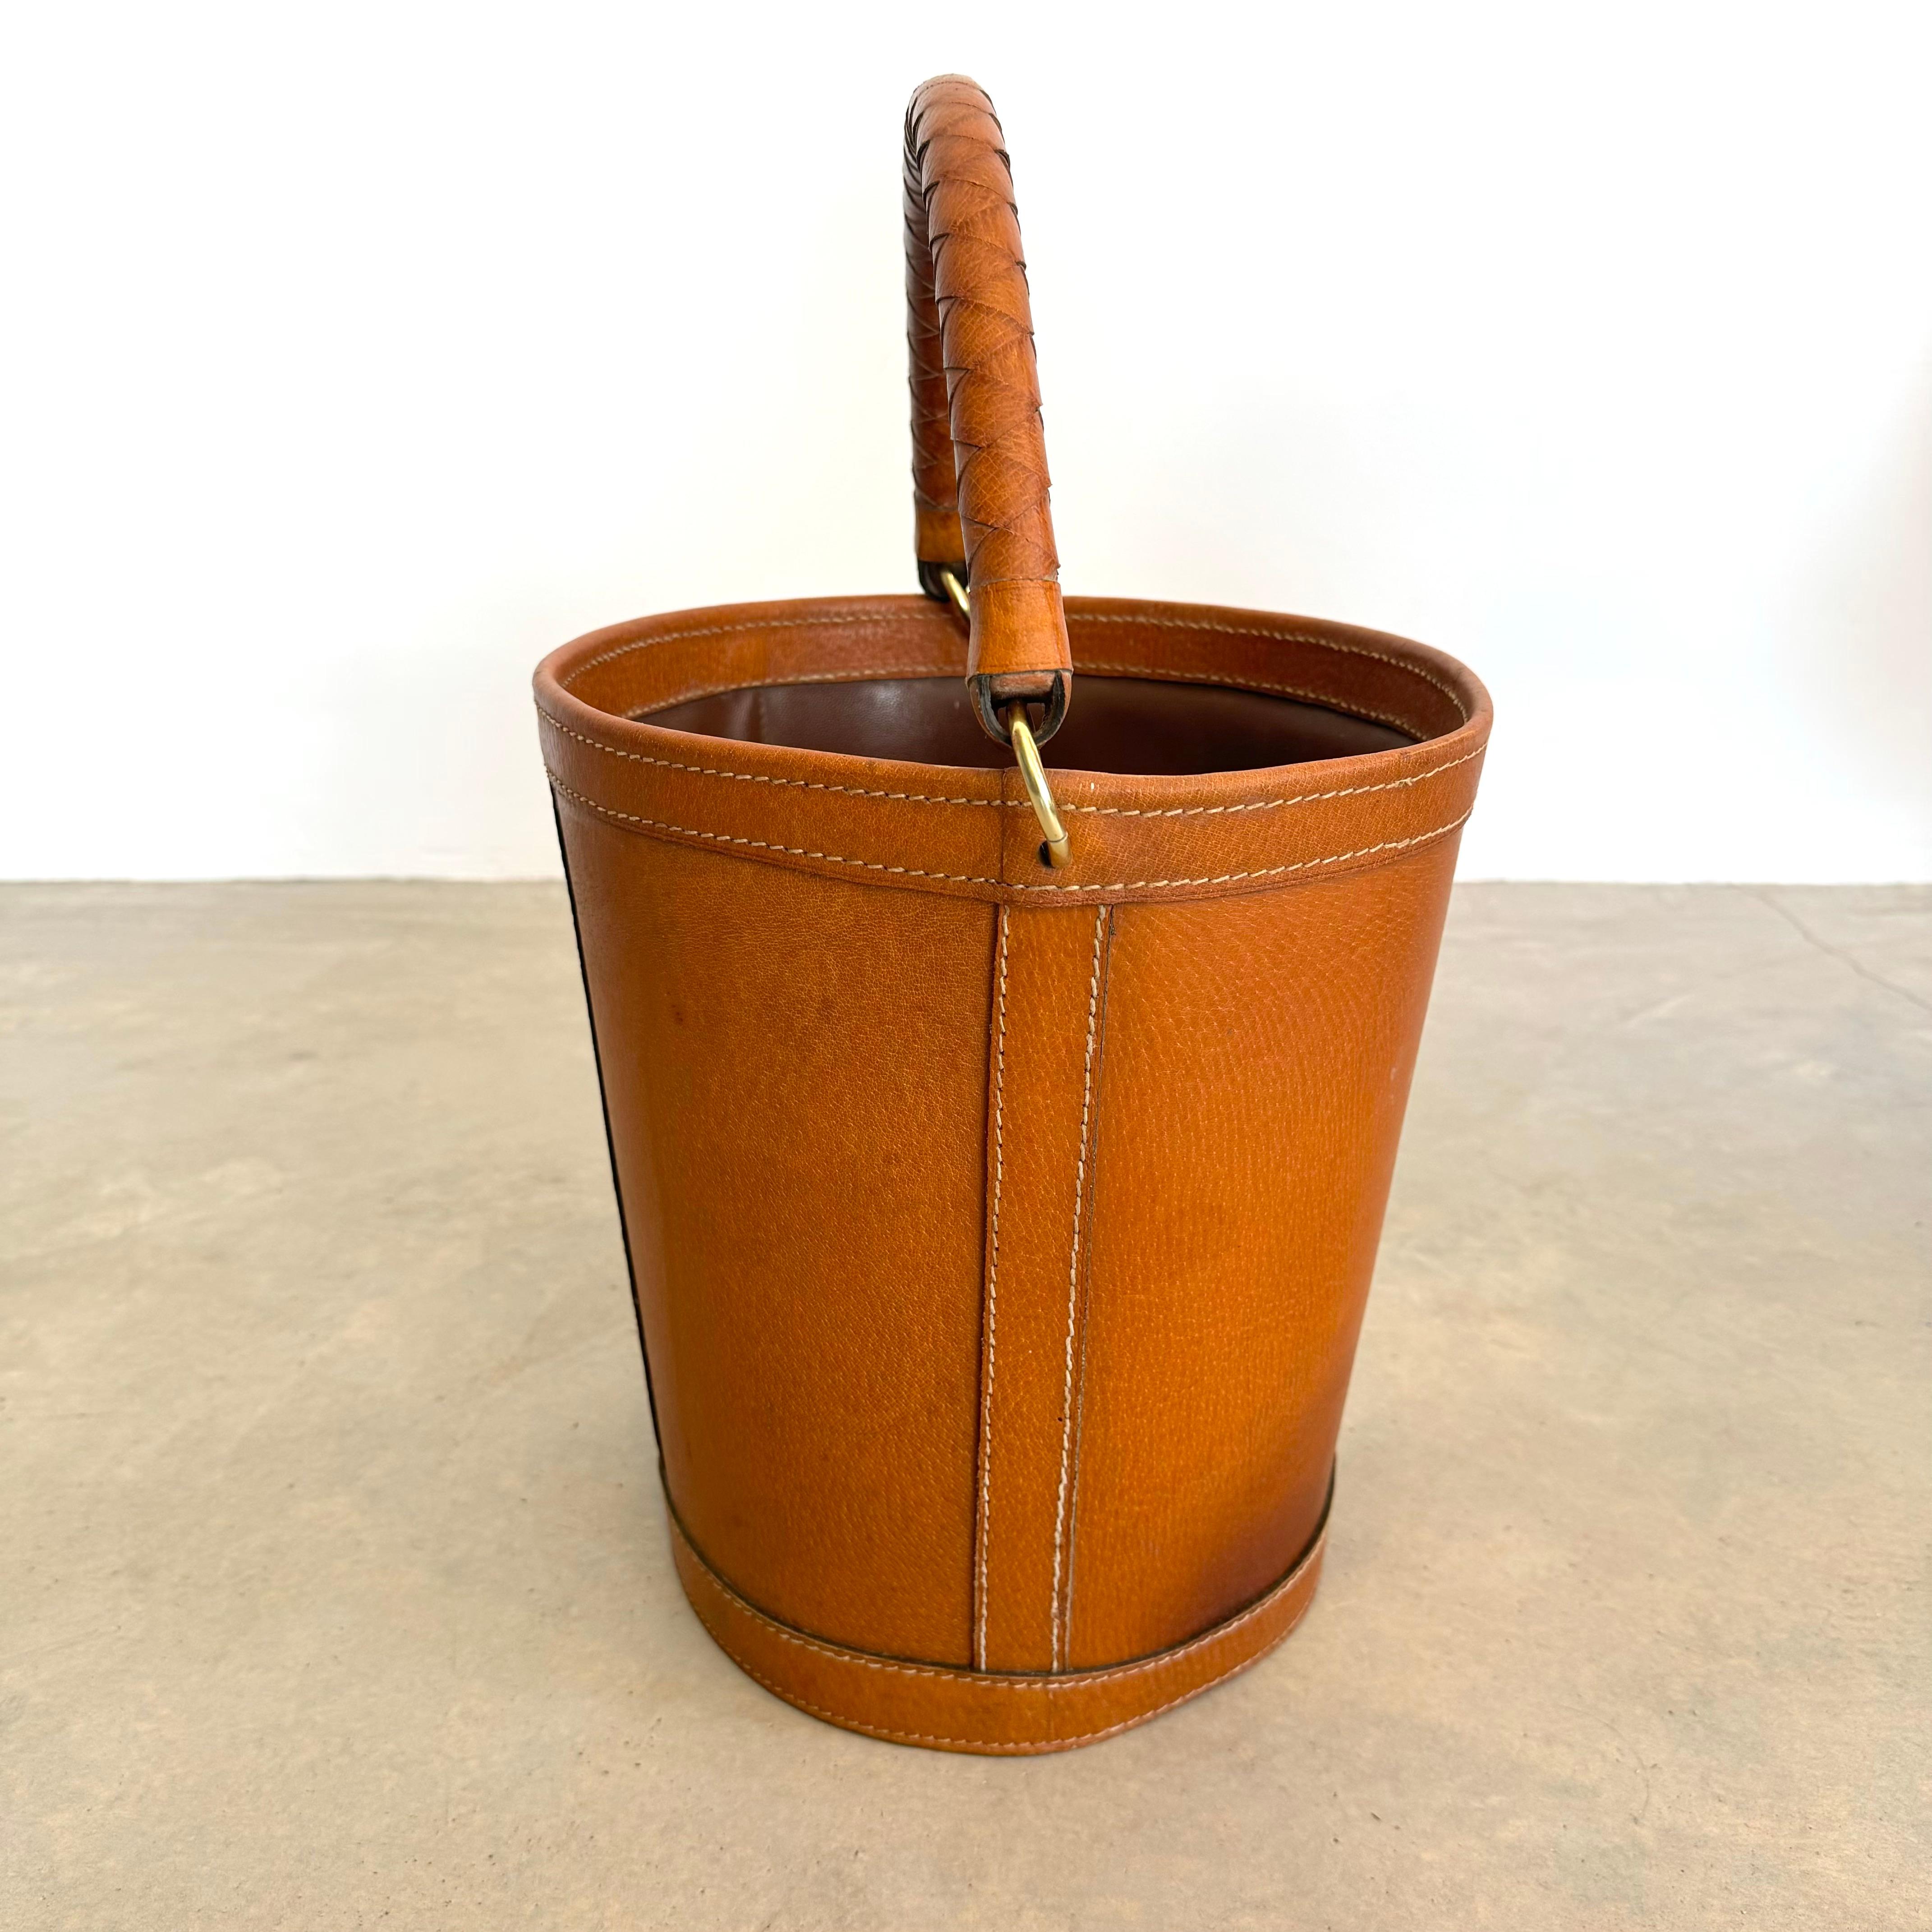 French saddle leather waste bin with a substantial braided leather handle. Great coloring to saddle leather. Large brass ring hardware. Contrast stitch throughout. plastic lining inside the bin to protect the leather against soiling or staining.